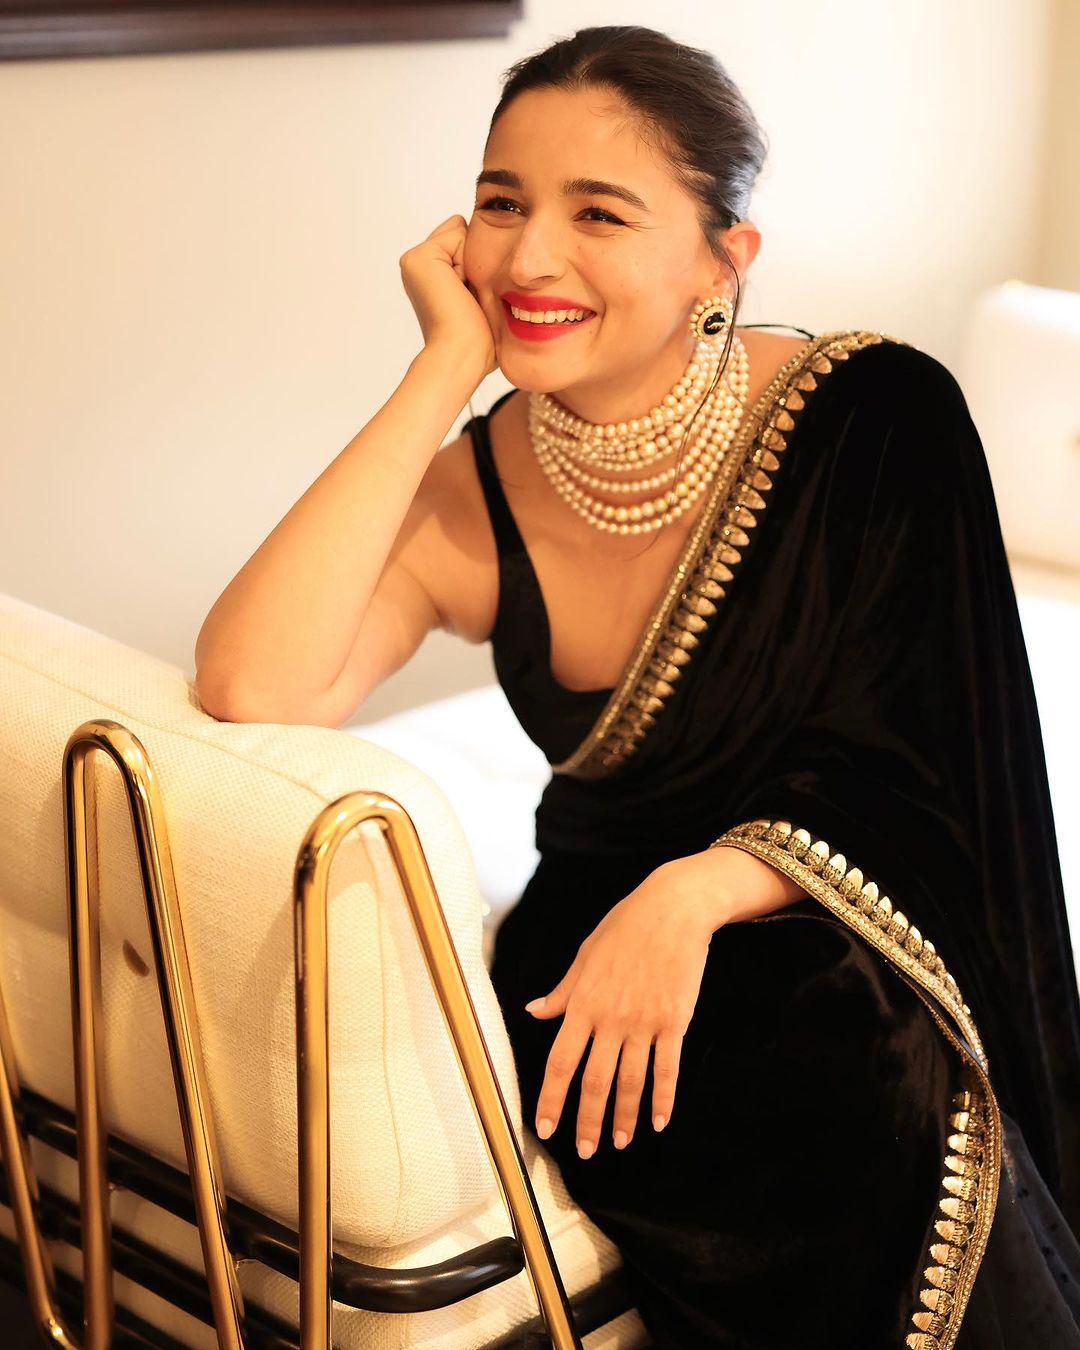 She looked amazing in the black velvet saree with a golden border and a sleek sleeveless blouse